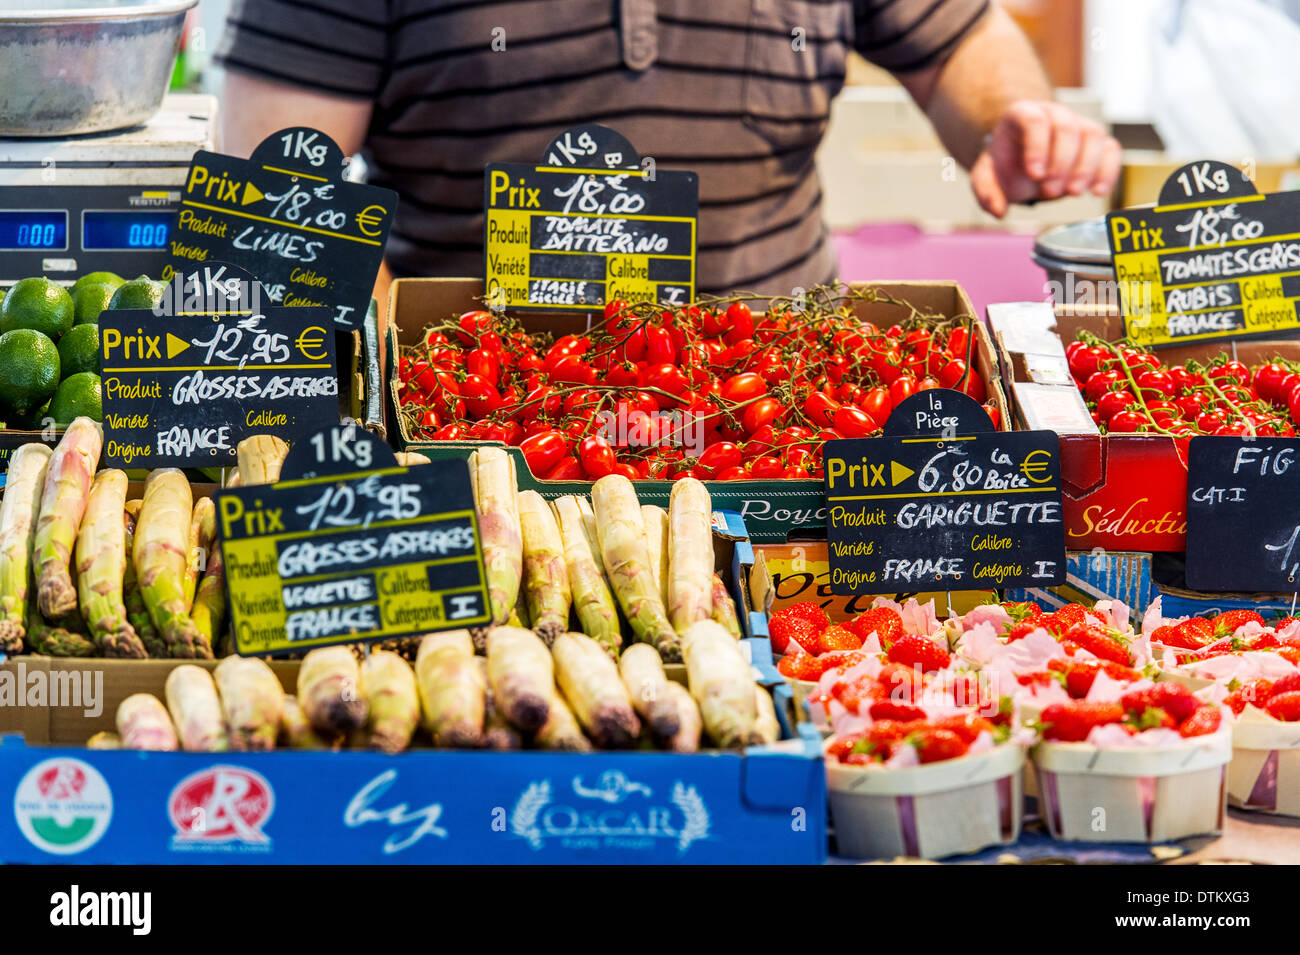 Europe, France, Alpes-Maritimes, Antibes. Provencal market. Strawberries Asparagus and tomatoes. Stock Photo